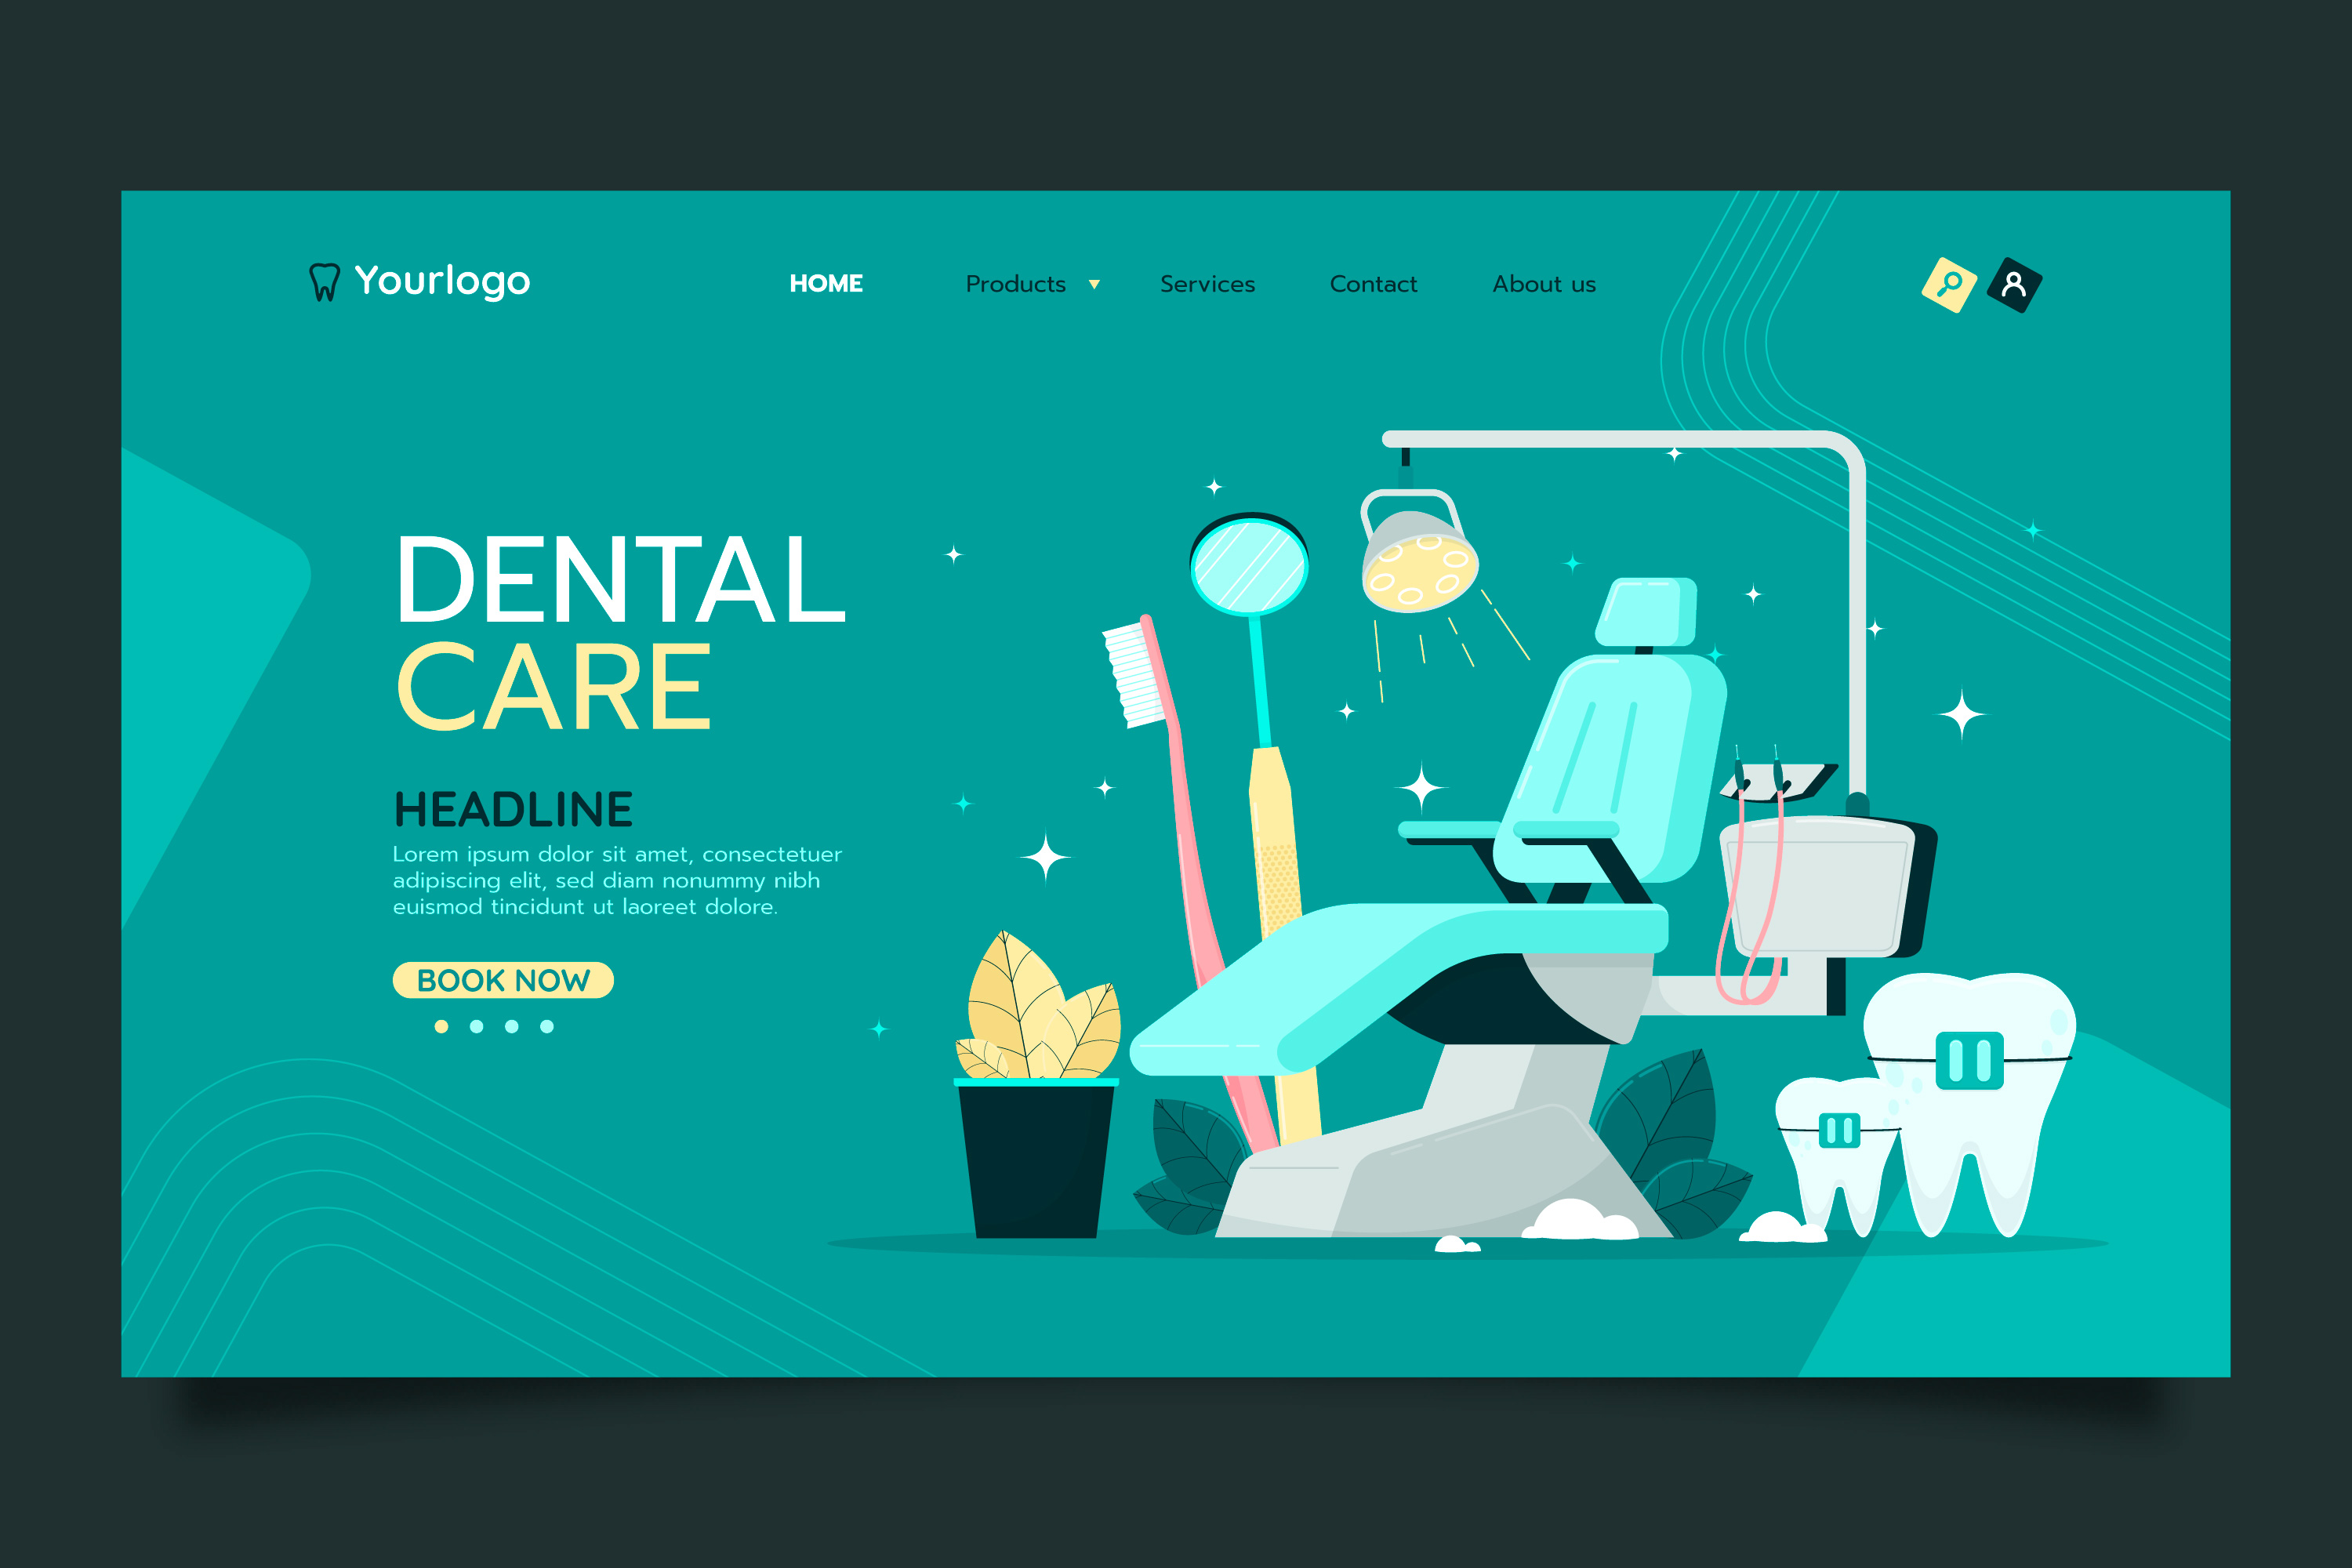 Google Ads Ultimate Guide For Dental Marketing Featured Image